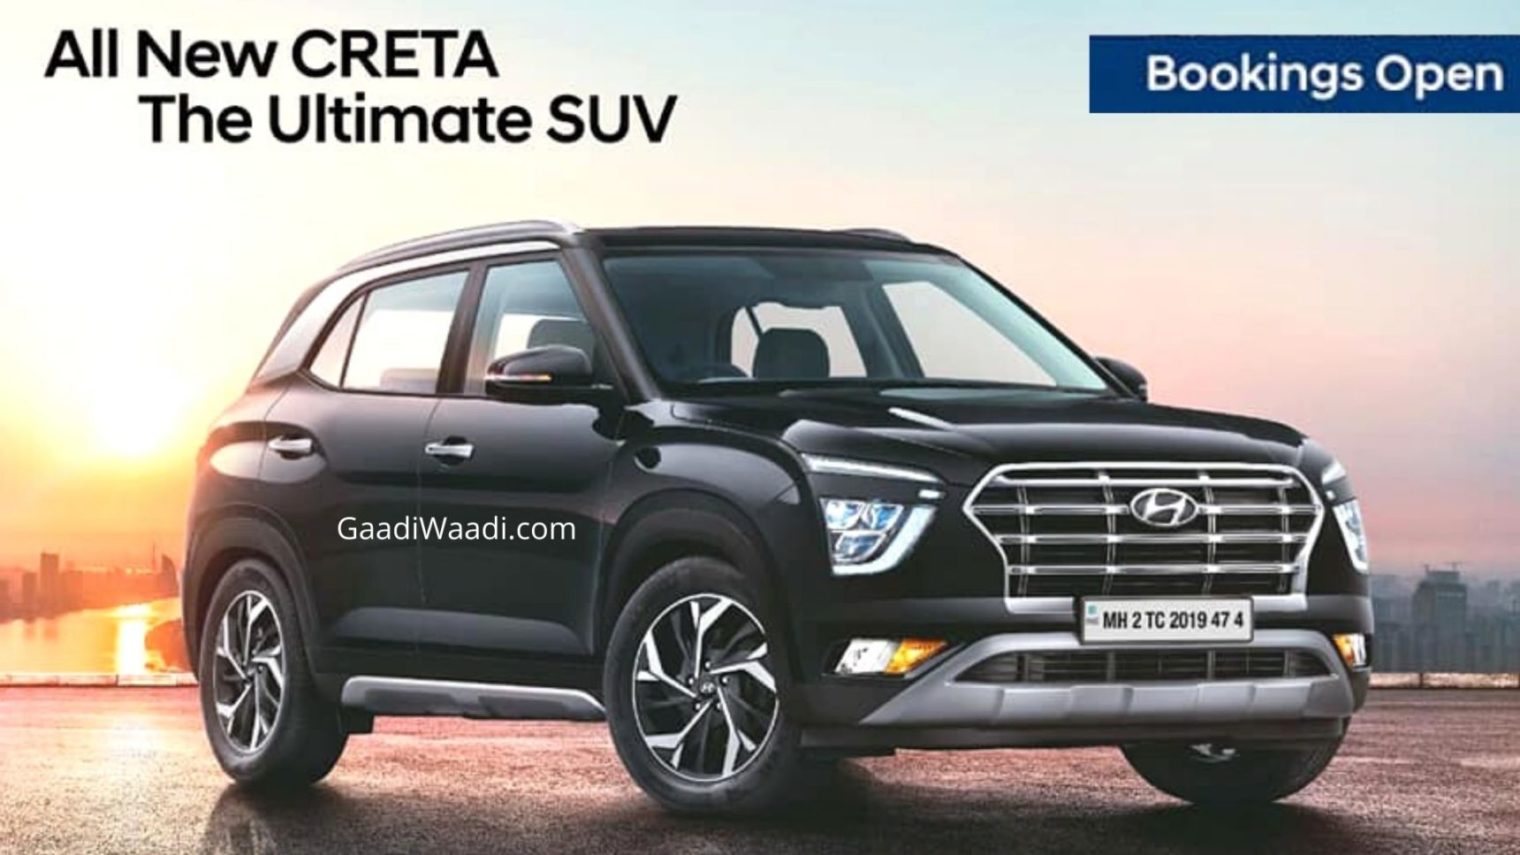 2020 Hyundai Creta Bookings Open Officially In India At Rs 25 000 Glbnews Com